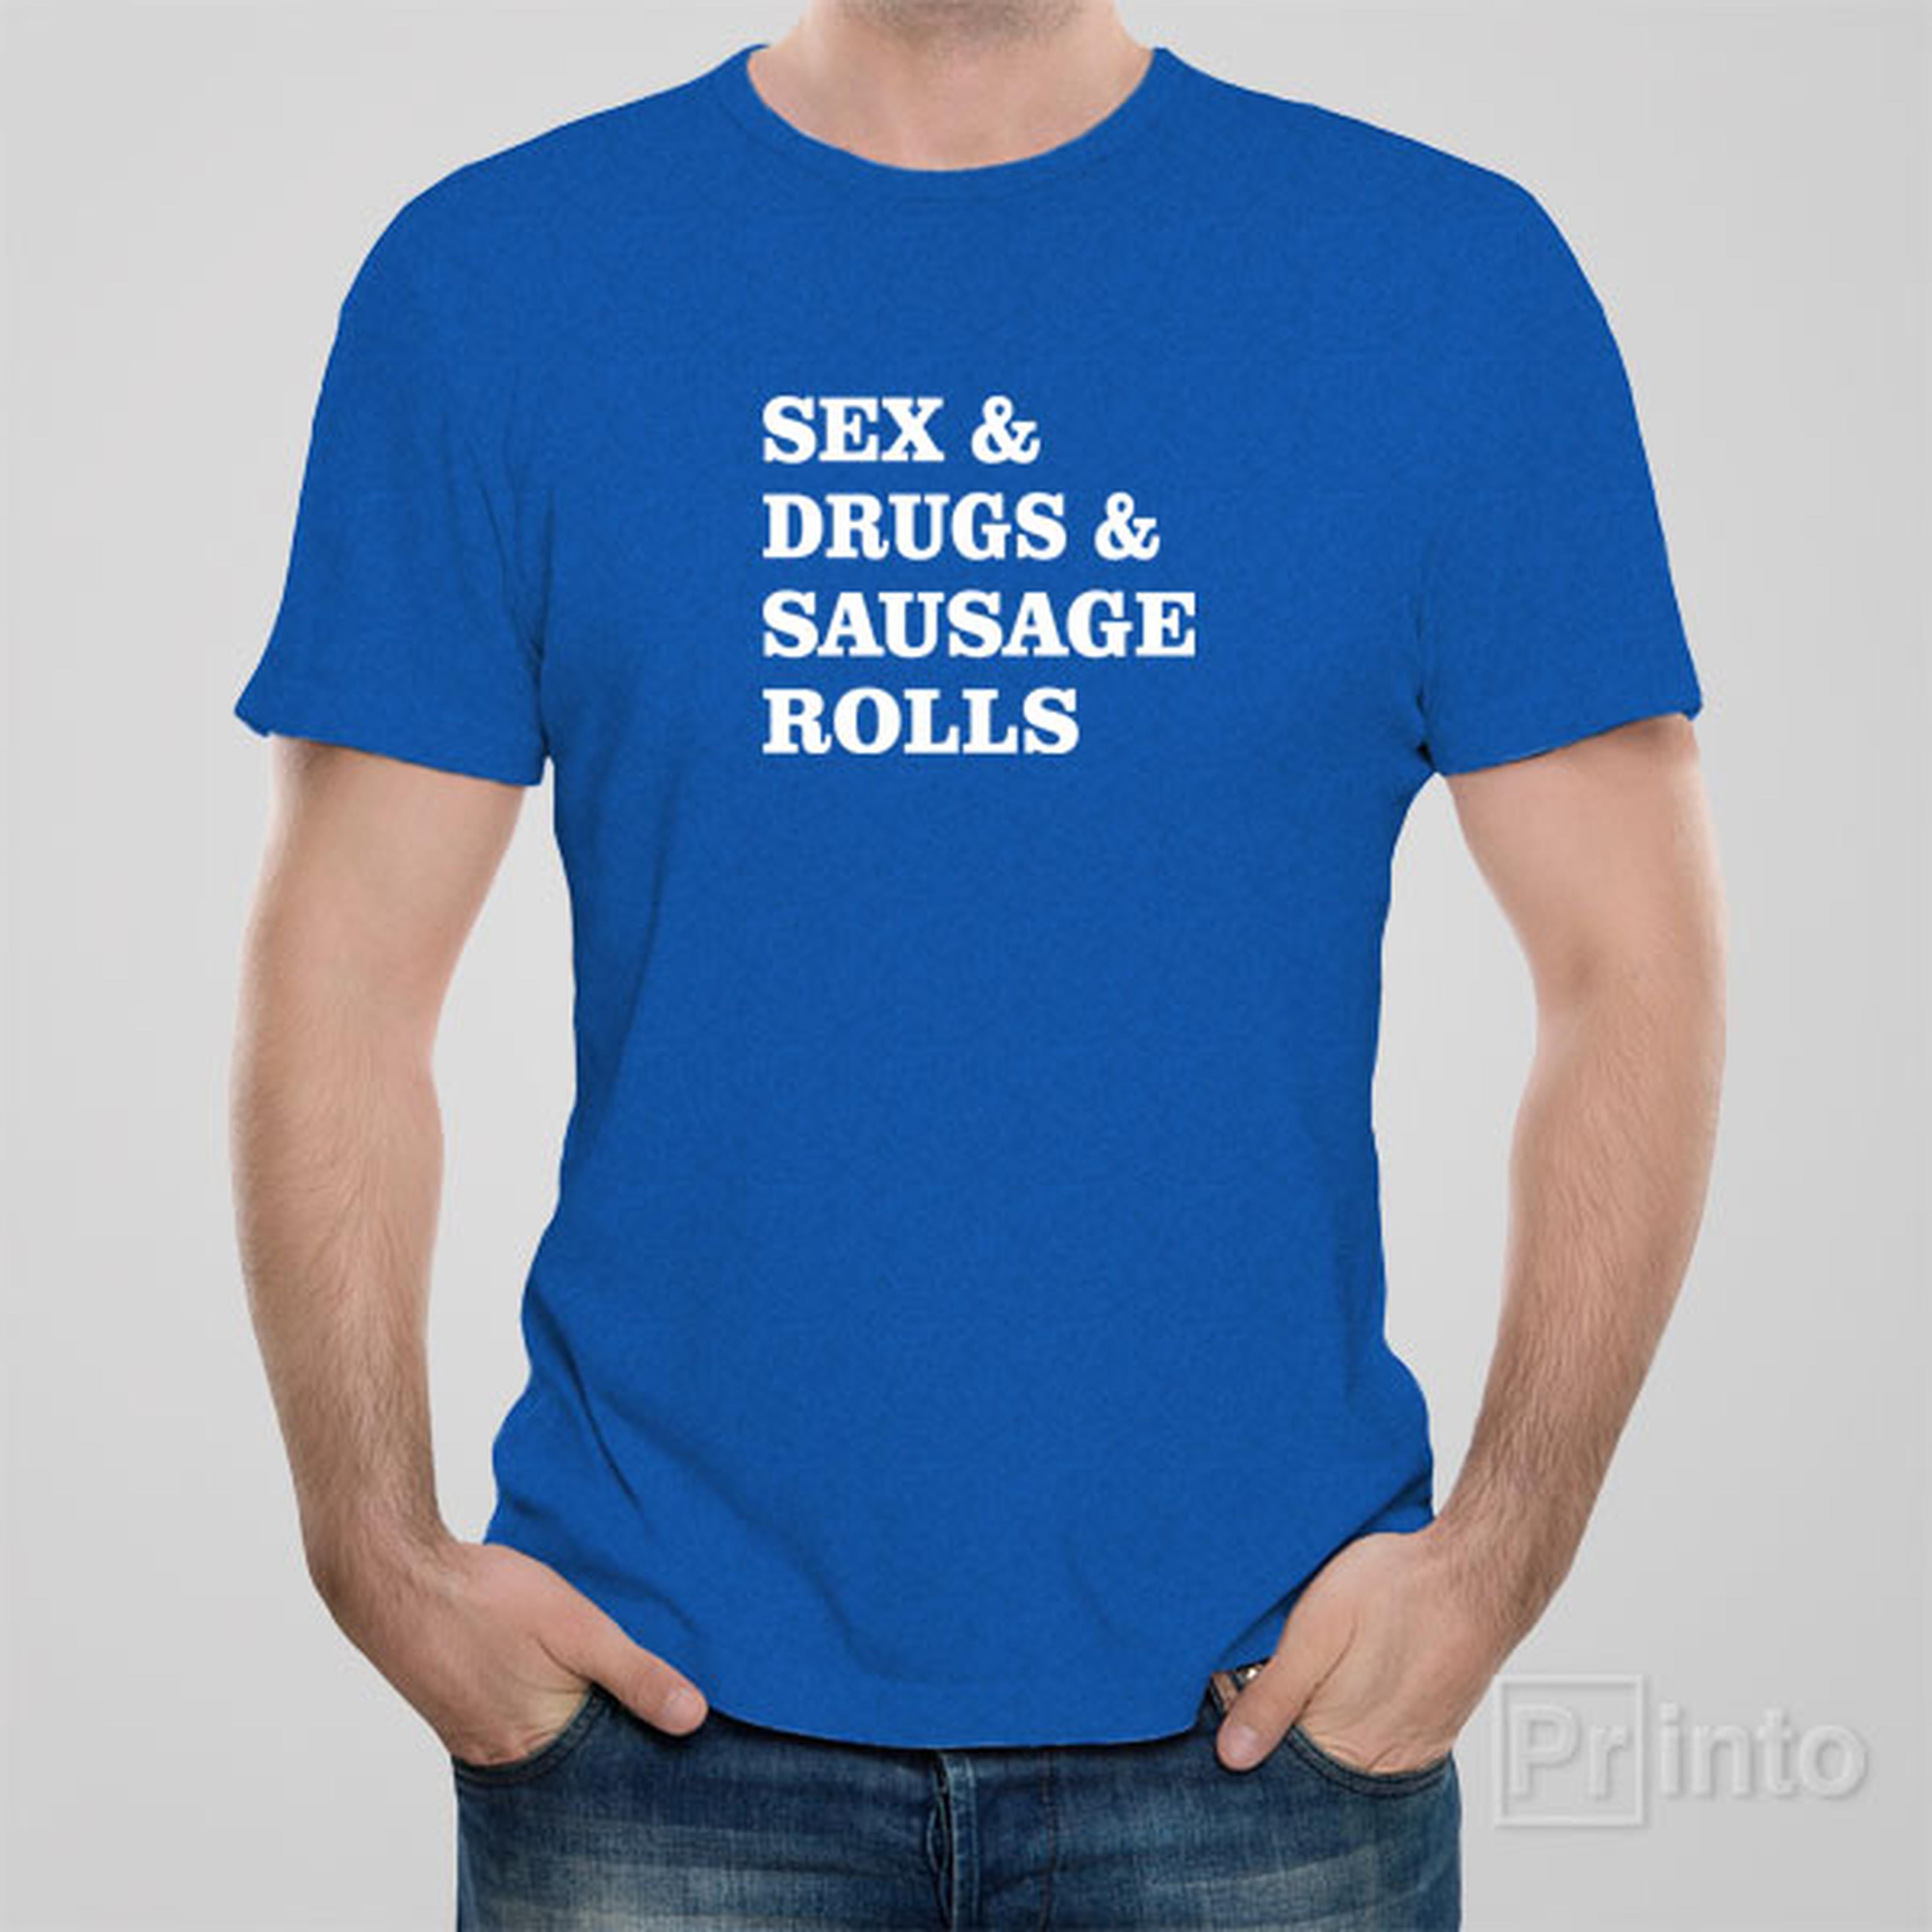 sex-and-drugs-and-sausage-rolls-t-shirt